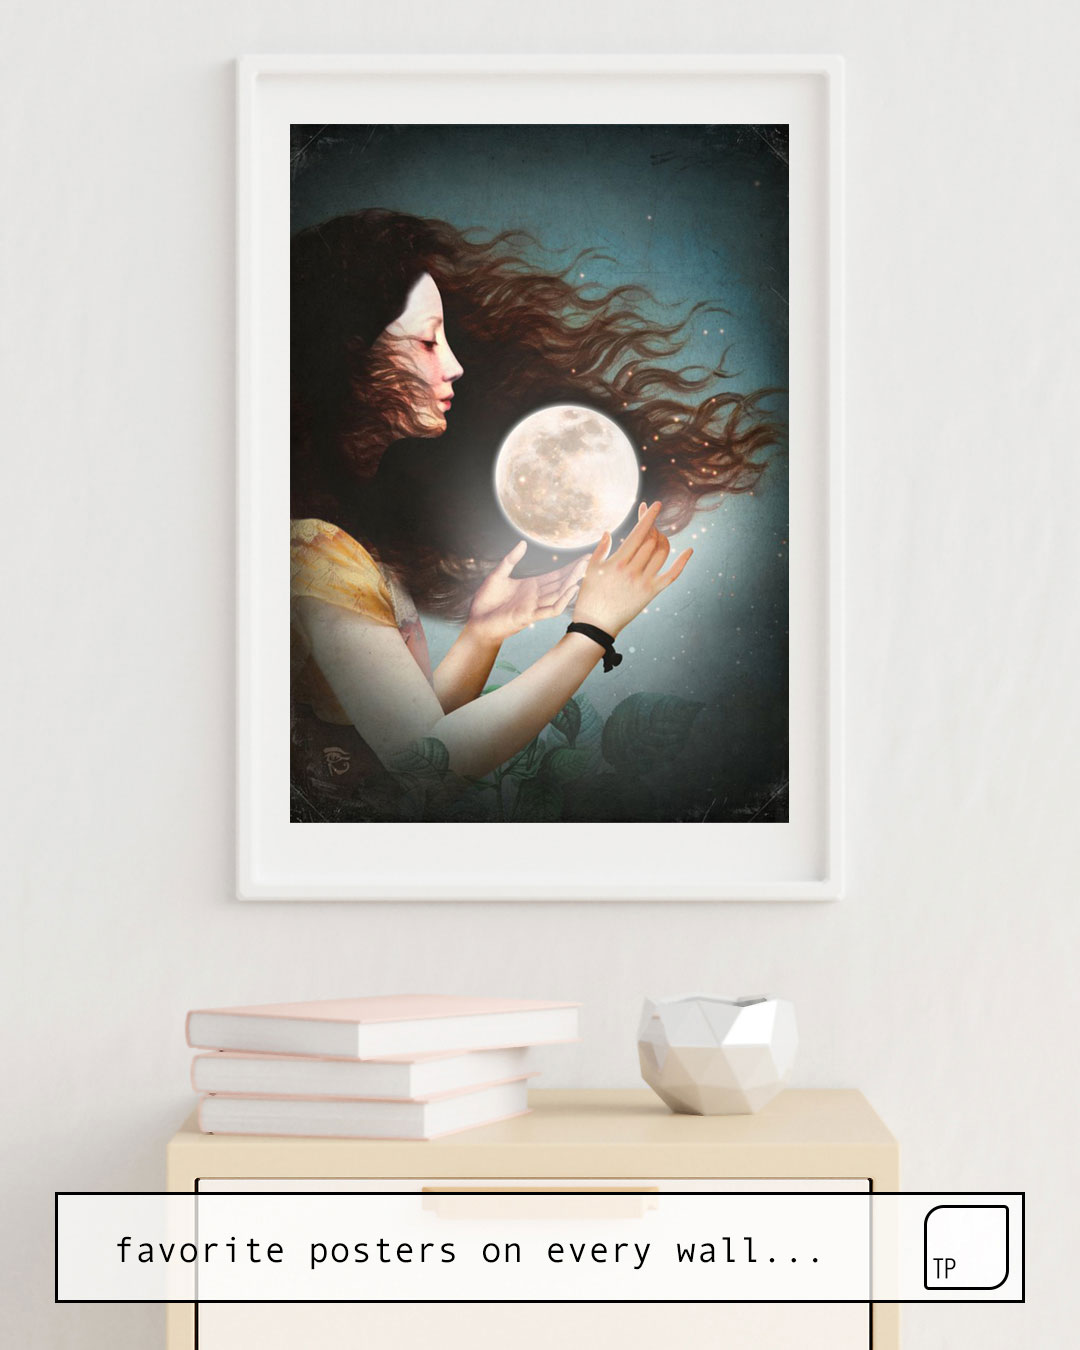 The photo shows an example of furnishing with the motif MEET THE MOON by Christian Schloe as mural